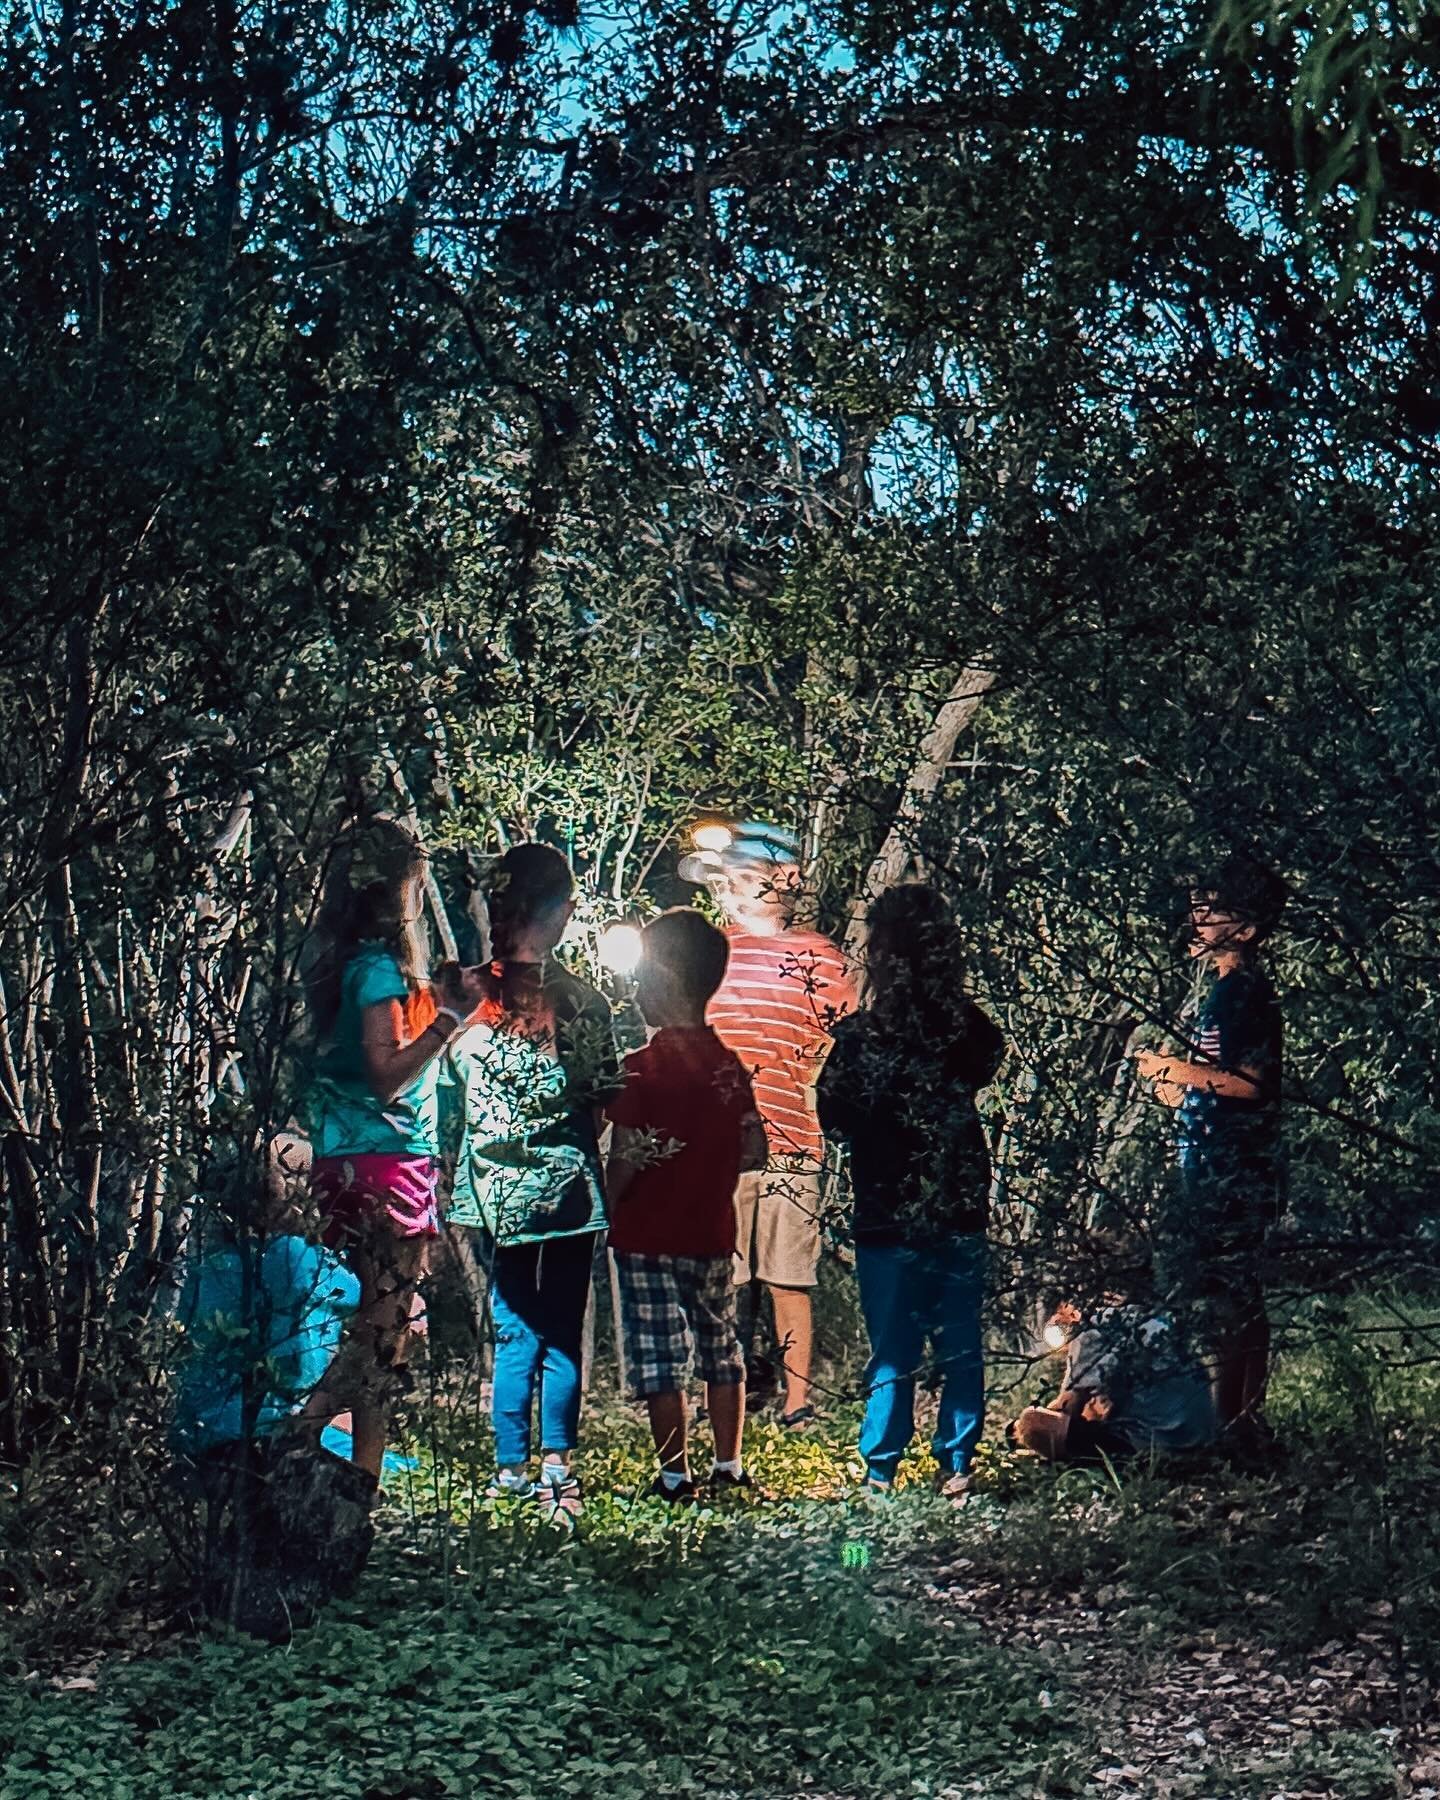 Childhood magic and secret clubhouse meetings under the moonlight are where friendships are forged and adventure takes flight! ⛺🔦

#everydayatxfamily #1000hoursoutside #camping #naturestudy #childhood #makingmemories #texastodo #betteroutside #texas